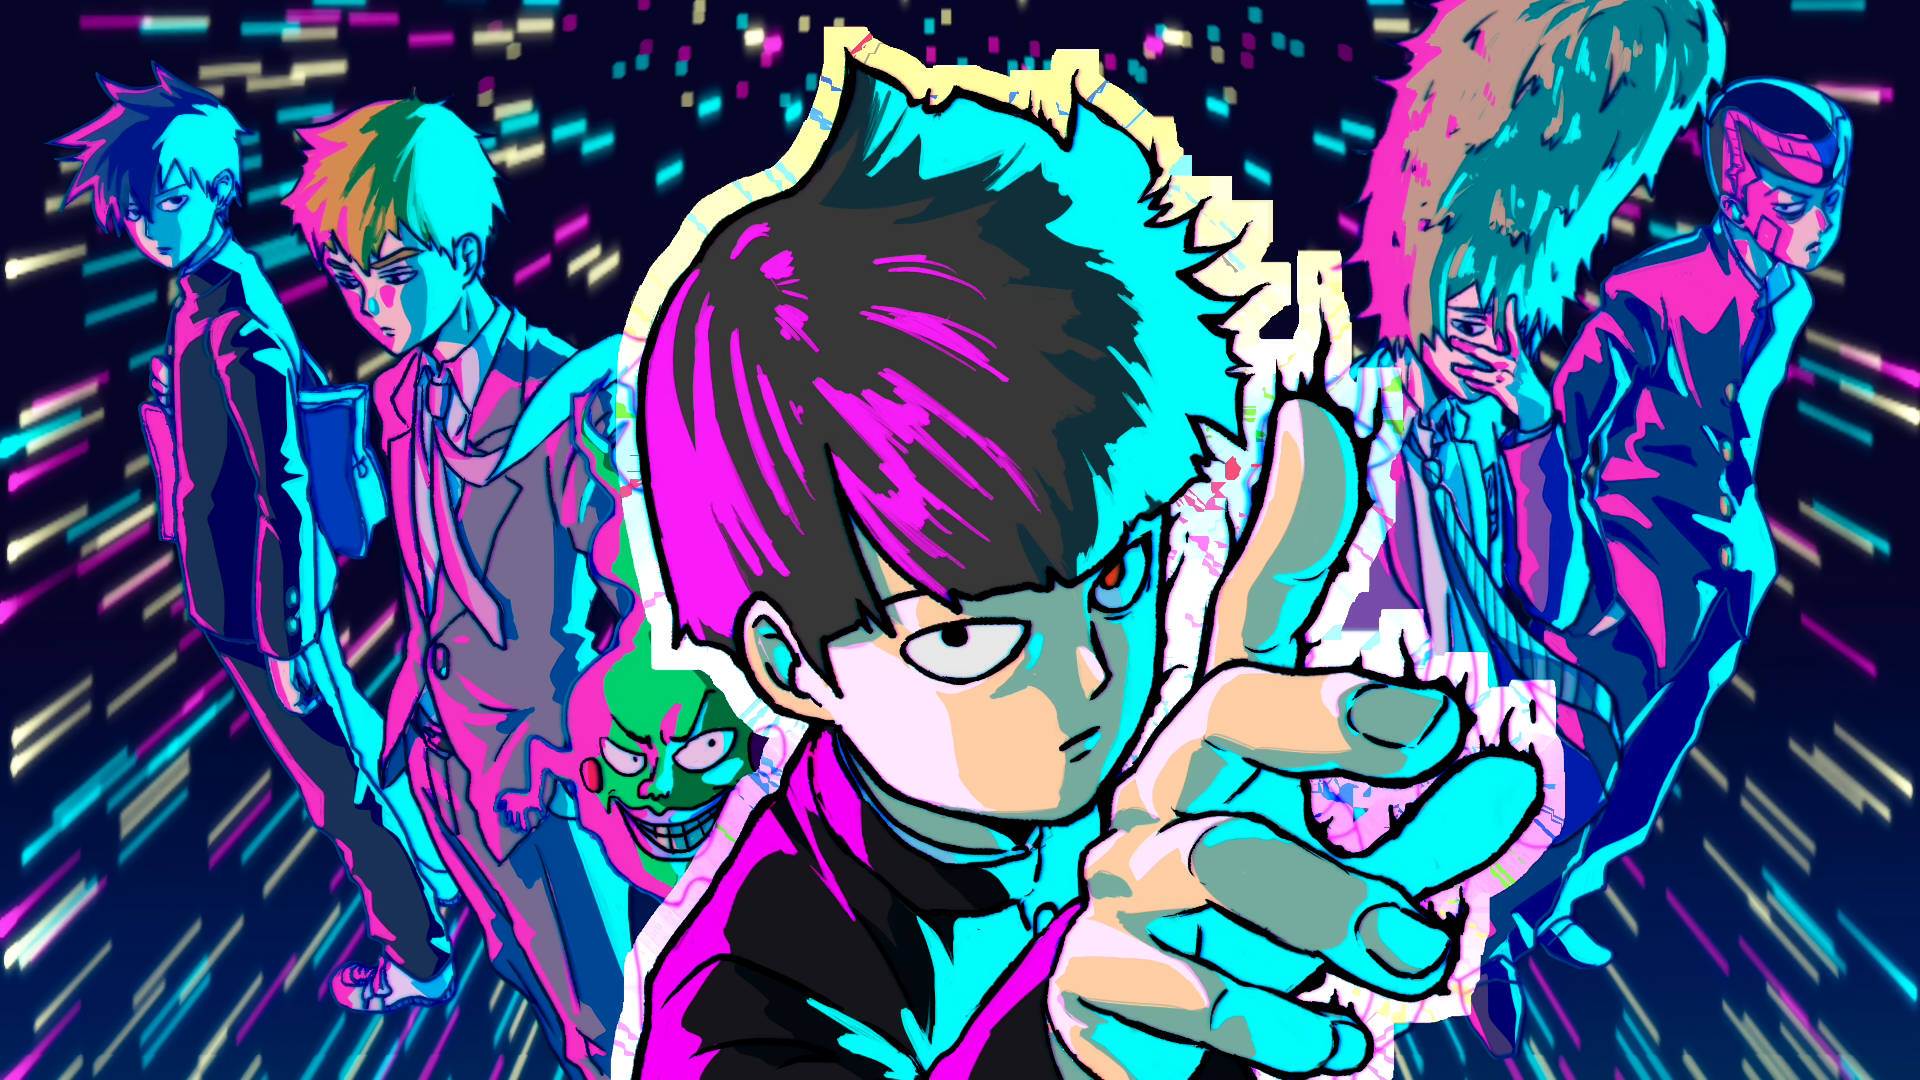 Free Mob Psycho 100 Wallpaper Downloads, [100+] Mob Psycho 100 Wallpapers  for FREE 